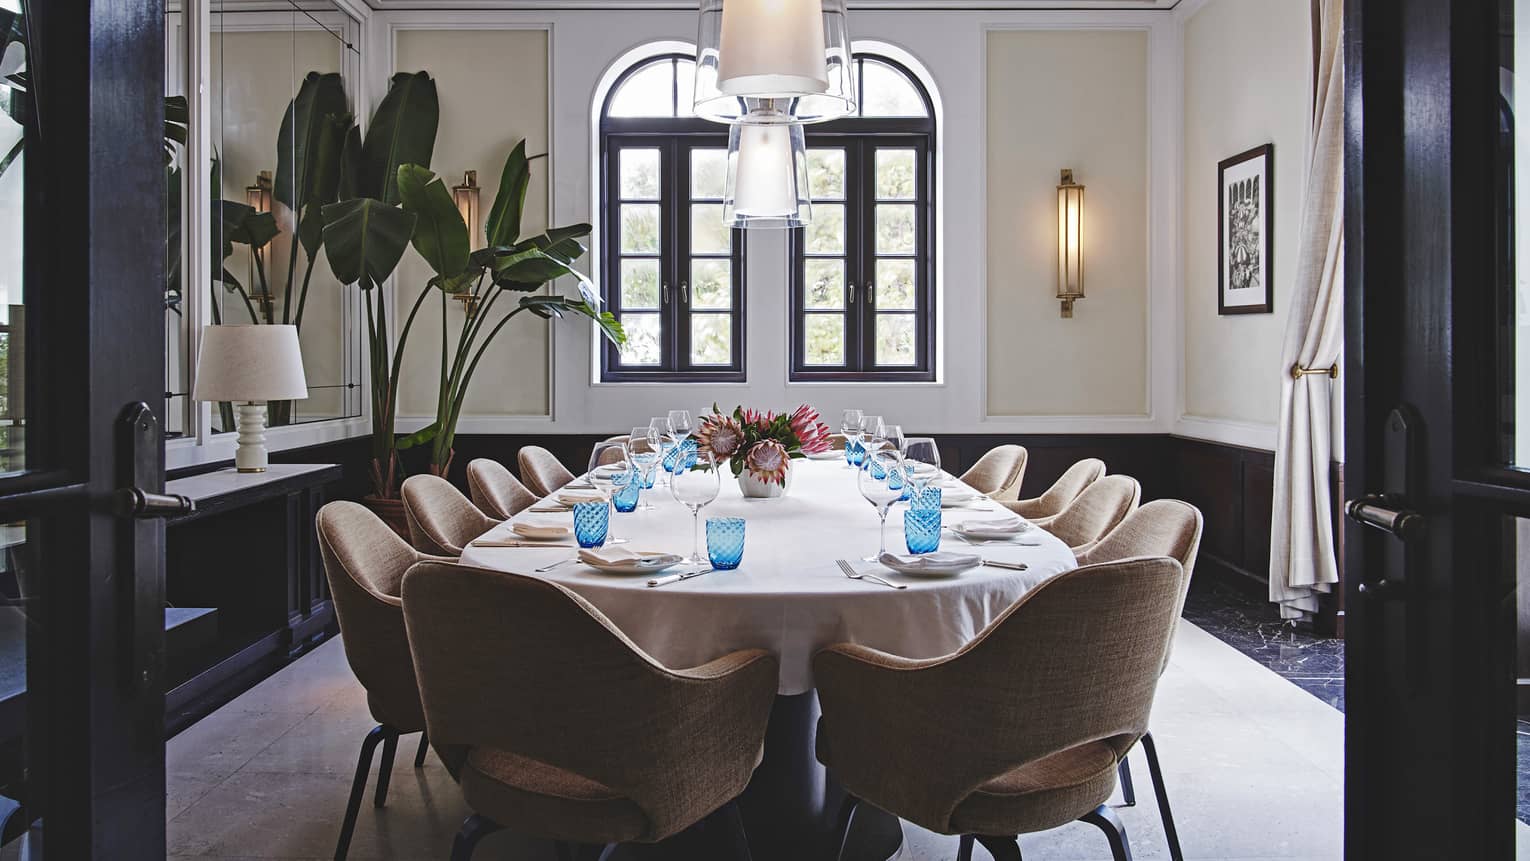 A private dining room with a long table surrounded by leather chairs, two lamps hang from the ceiling while tall plants are in the corner next to windows.